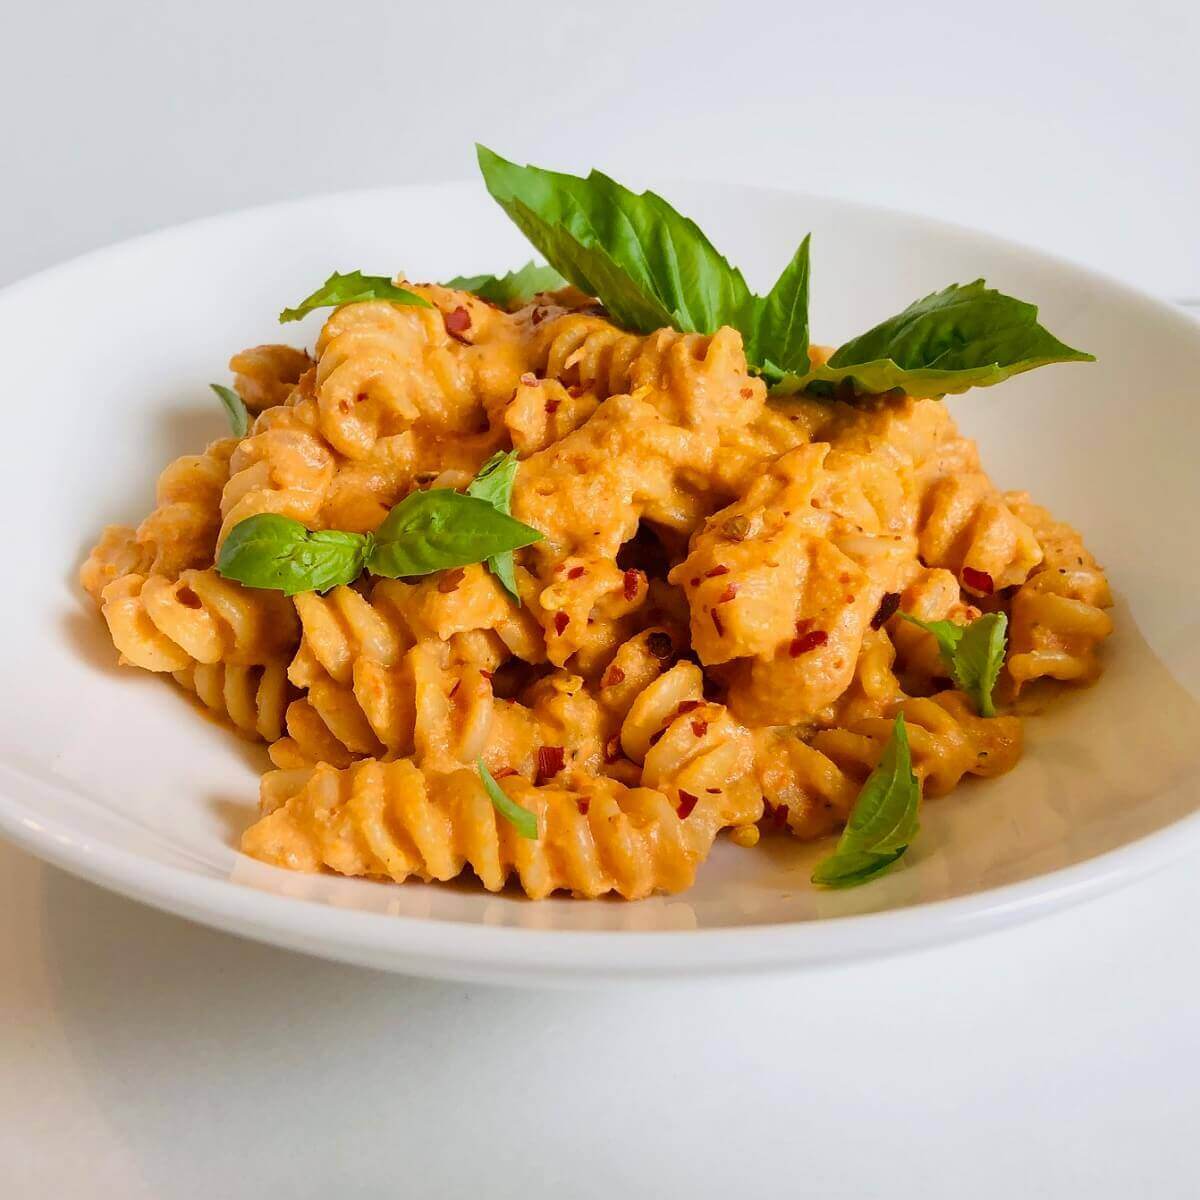 Vegan creamy tomato pasta in a white bowl garnished with basil and crushed red pepper.